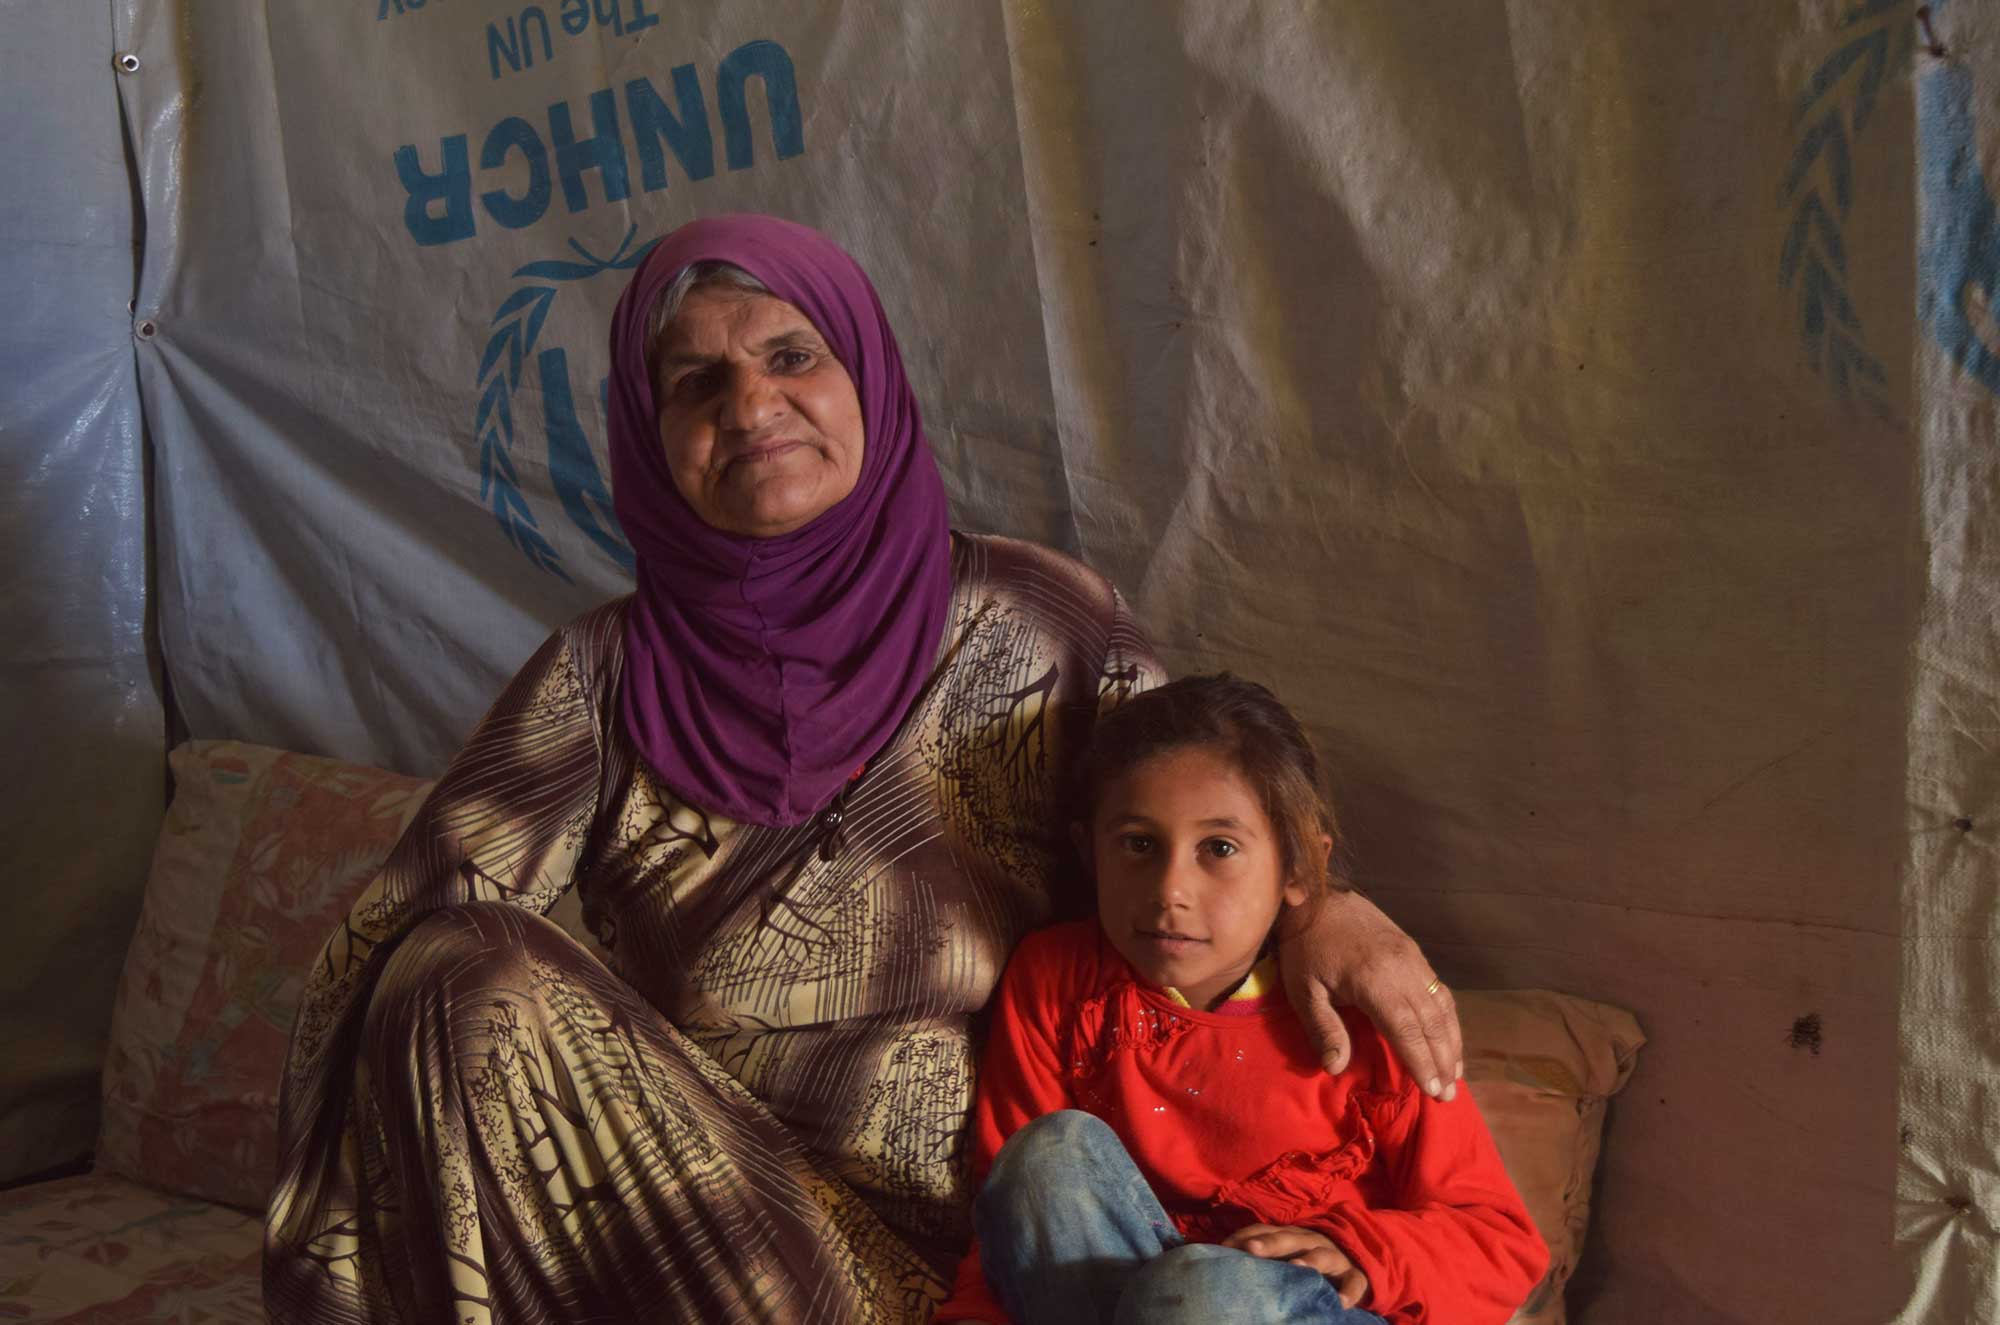 Zainab’s parents were killed trying to get her brother out of Syria. She lives alone with her grandmother.